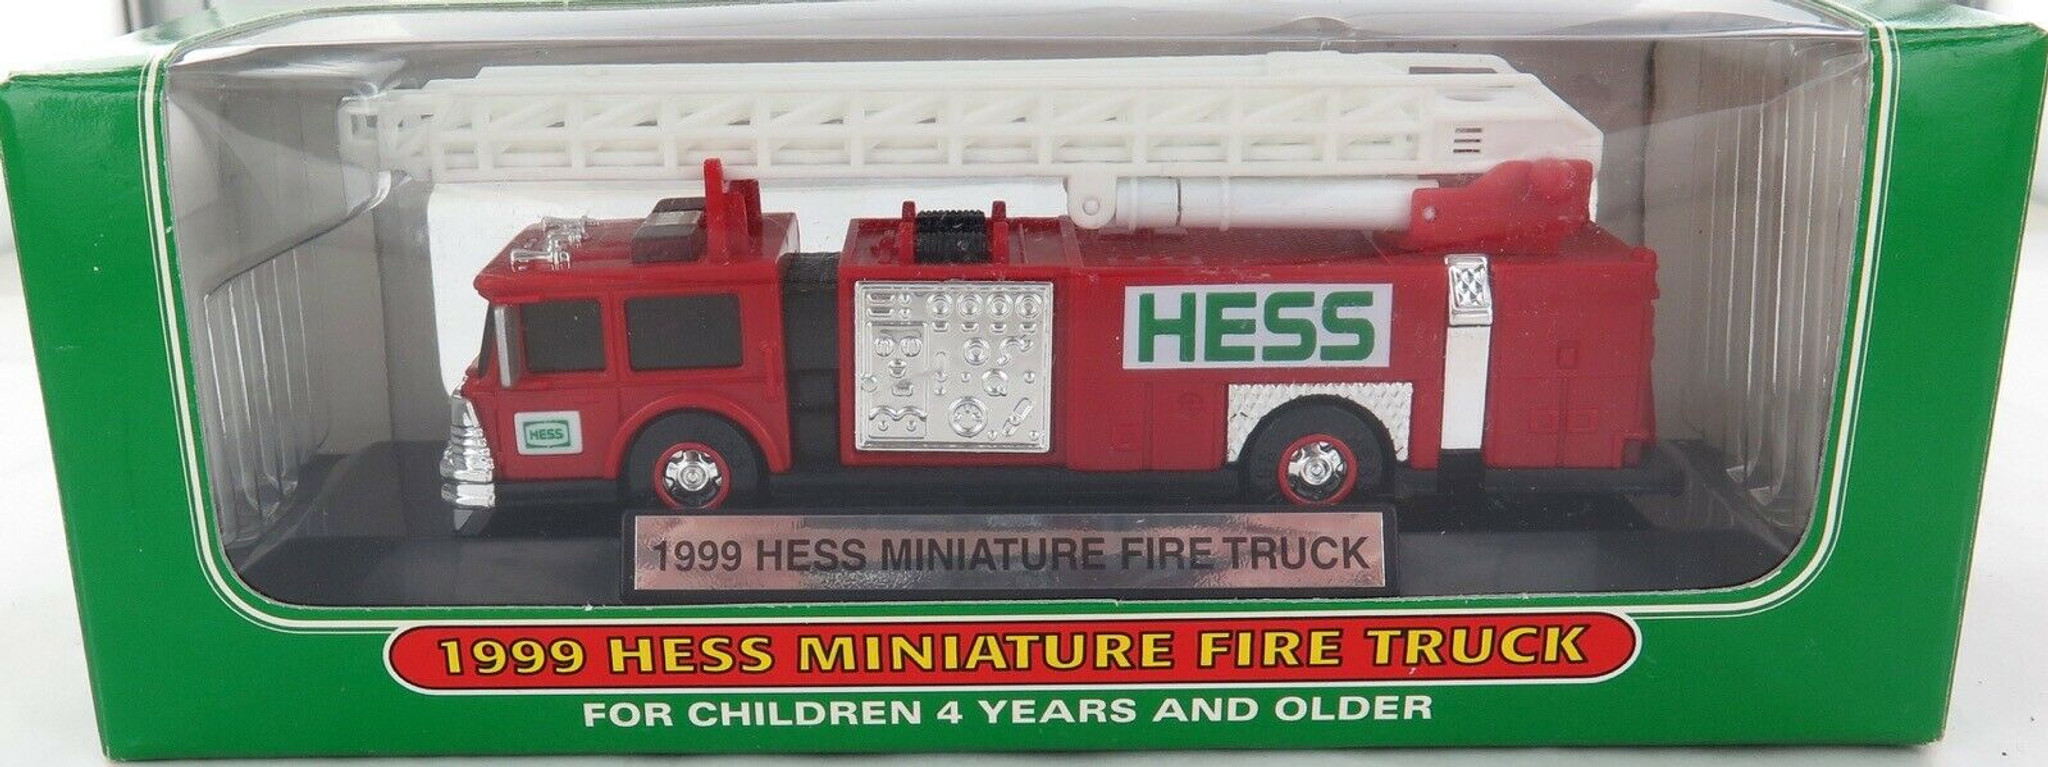 MINT IN BOX 1999 MINIATURE HESS DIECAST FIRE TRUCK. HARD TO GET IN ...